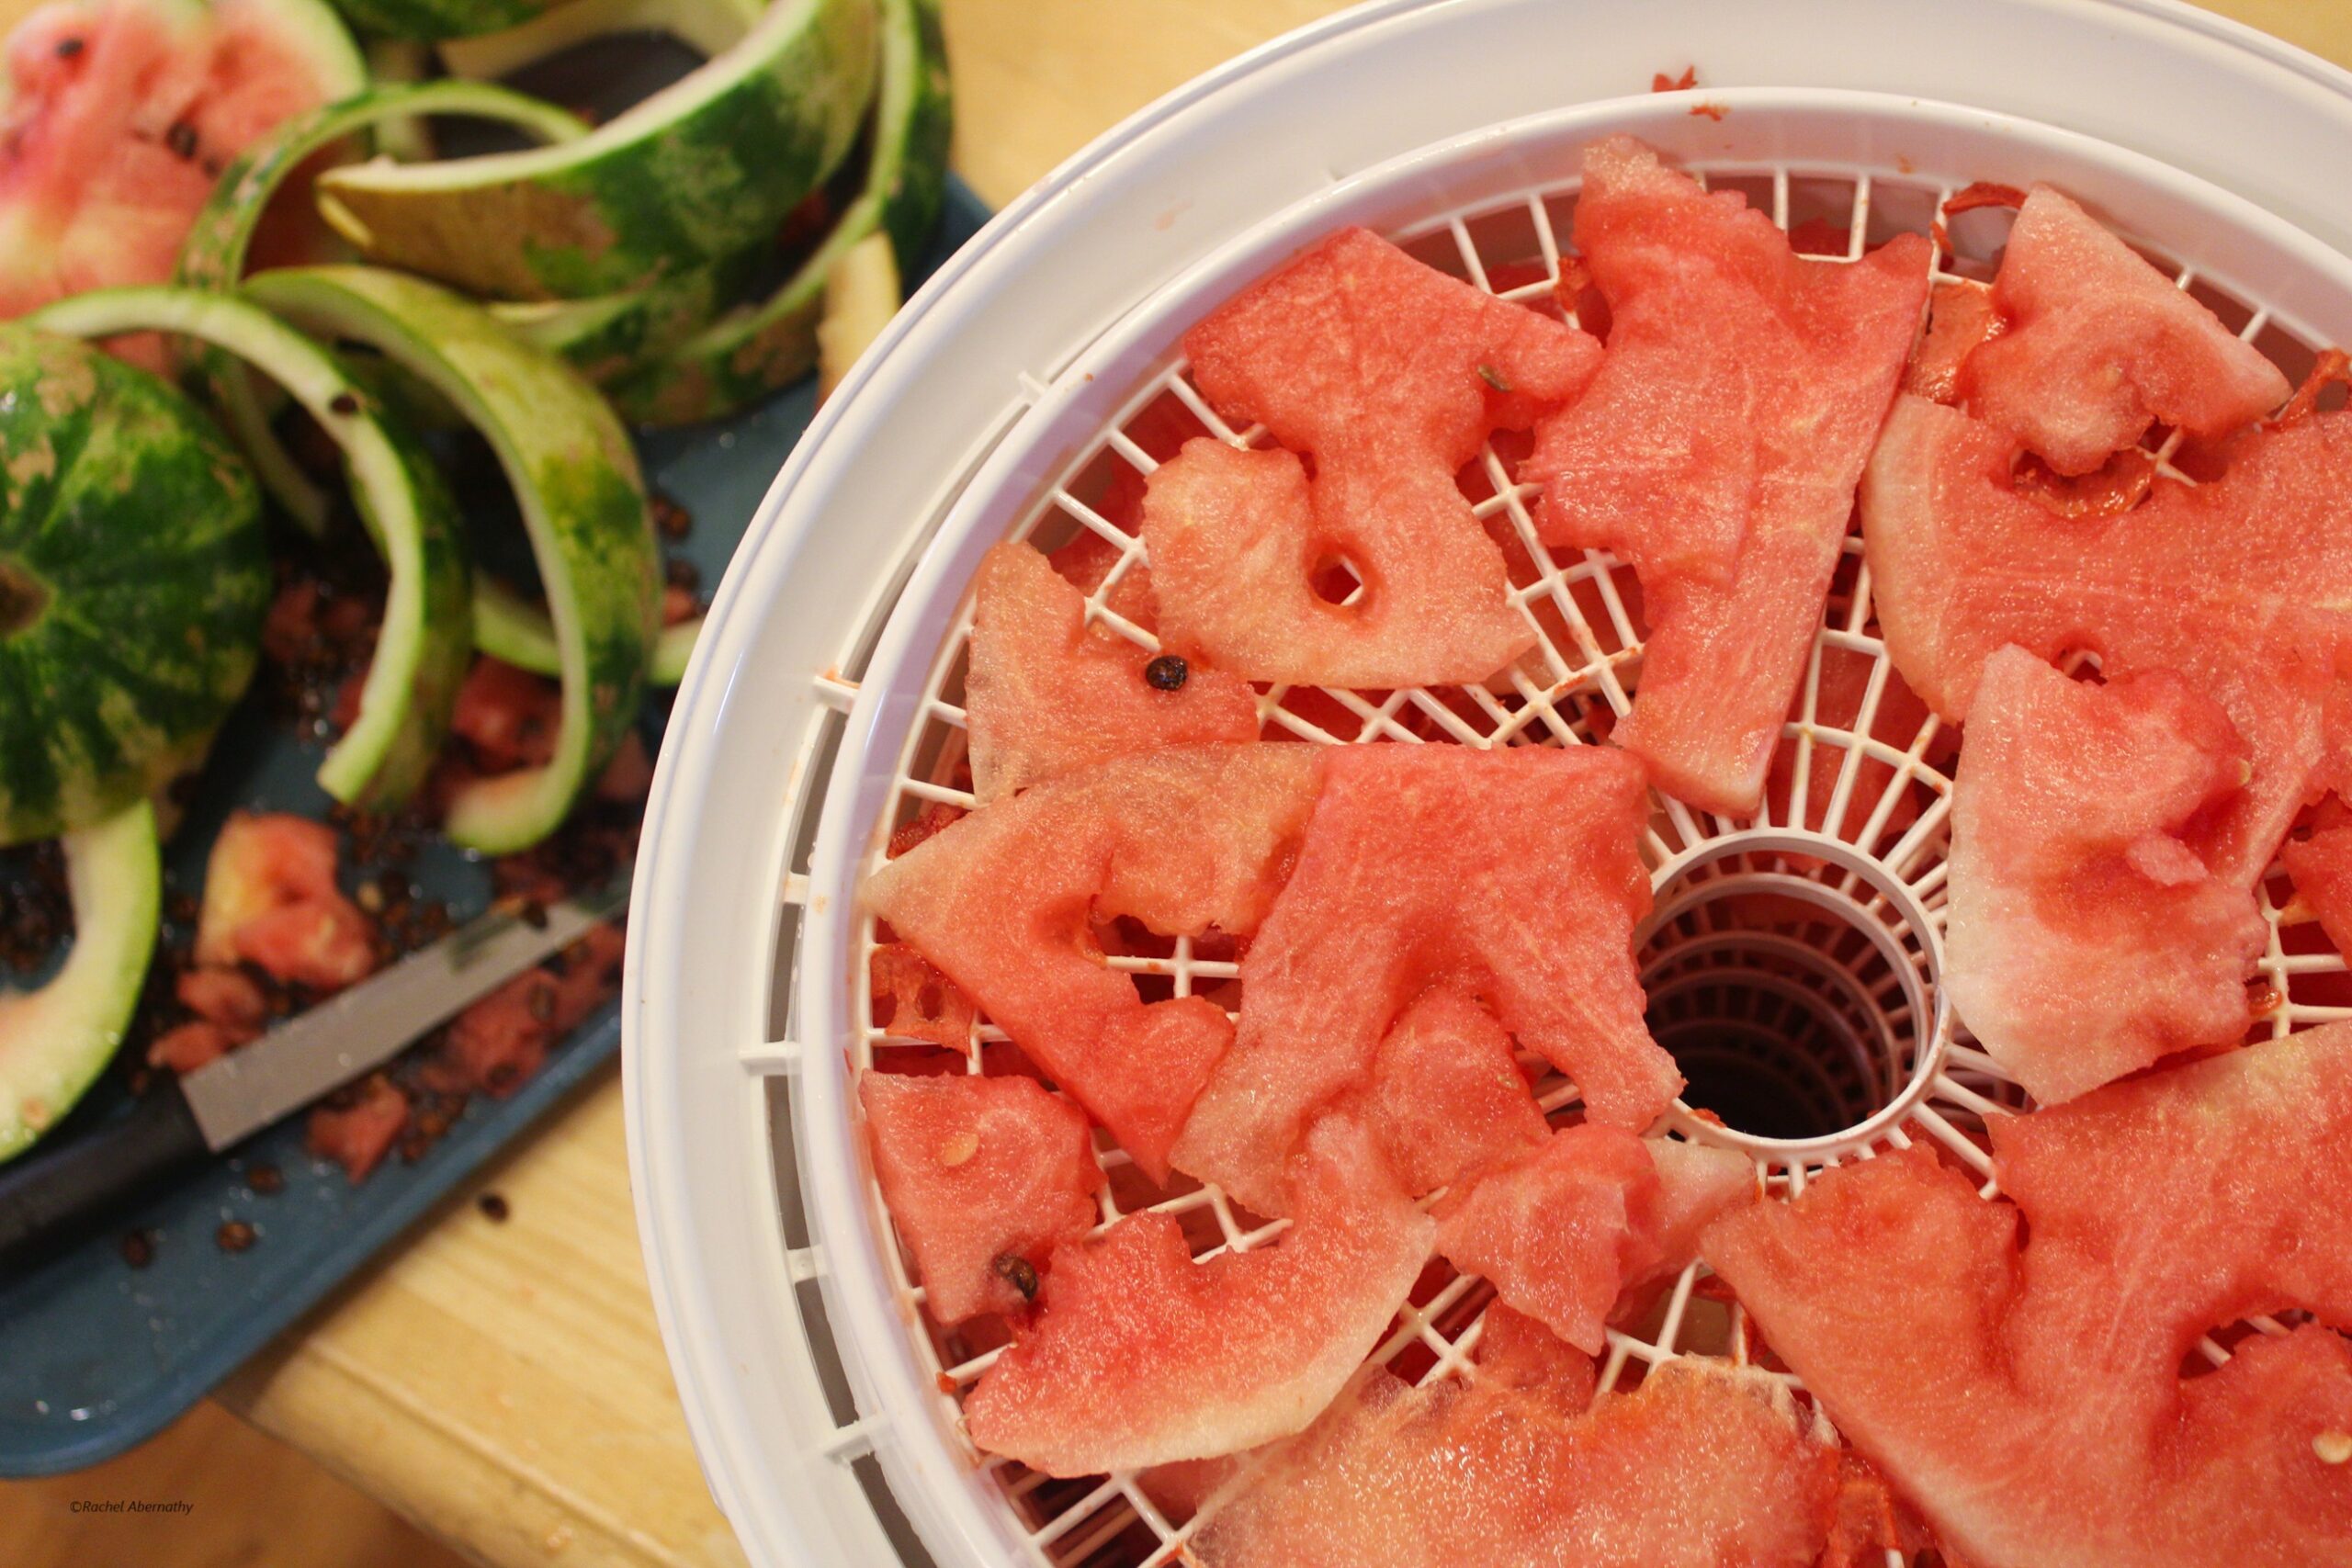 A dehydrator filled with slices of red watermelon with watermelon rinds in the background.